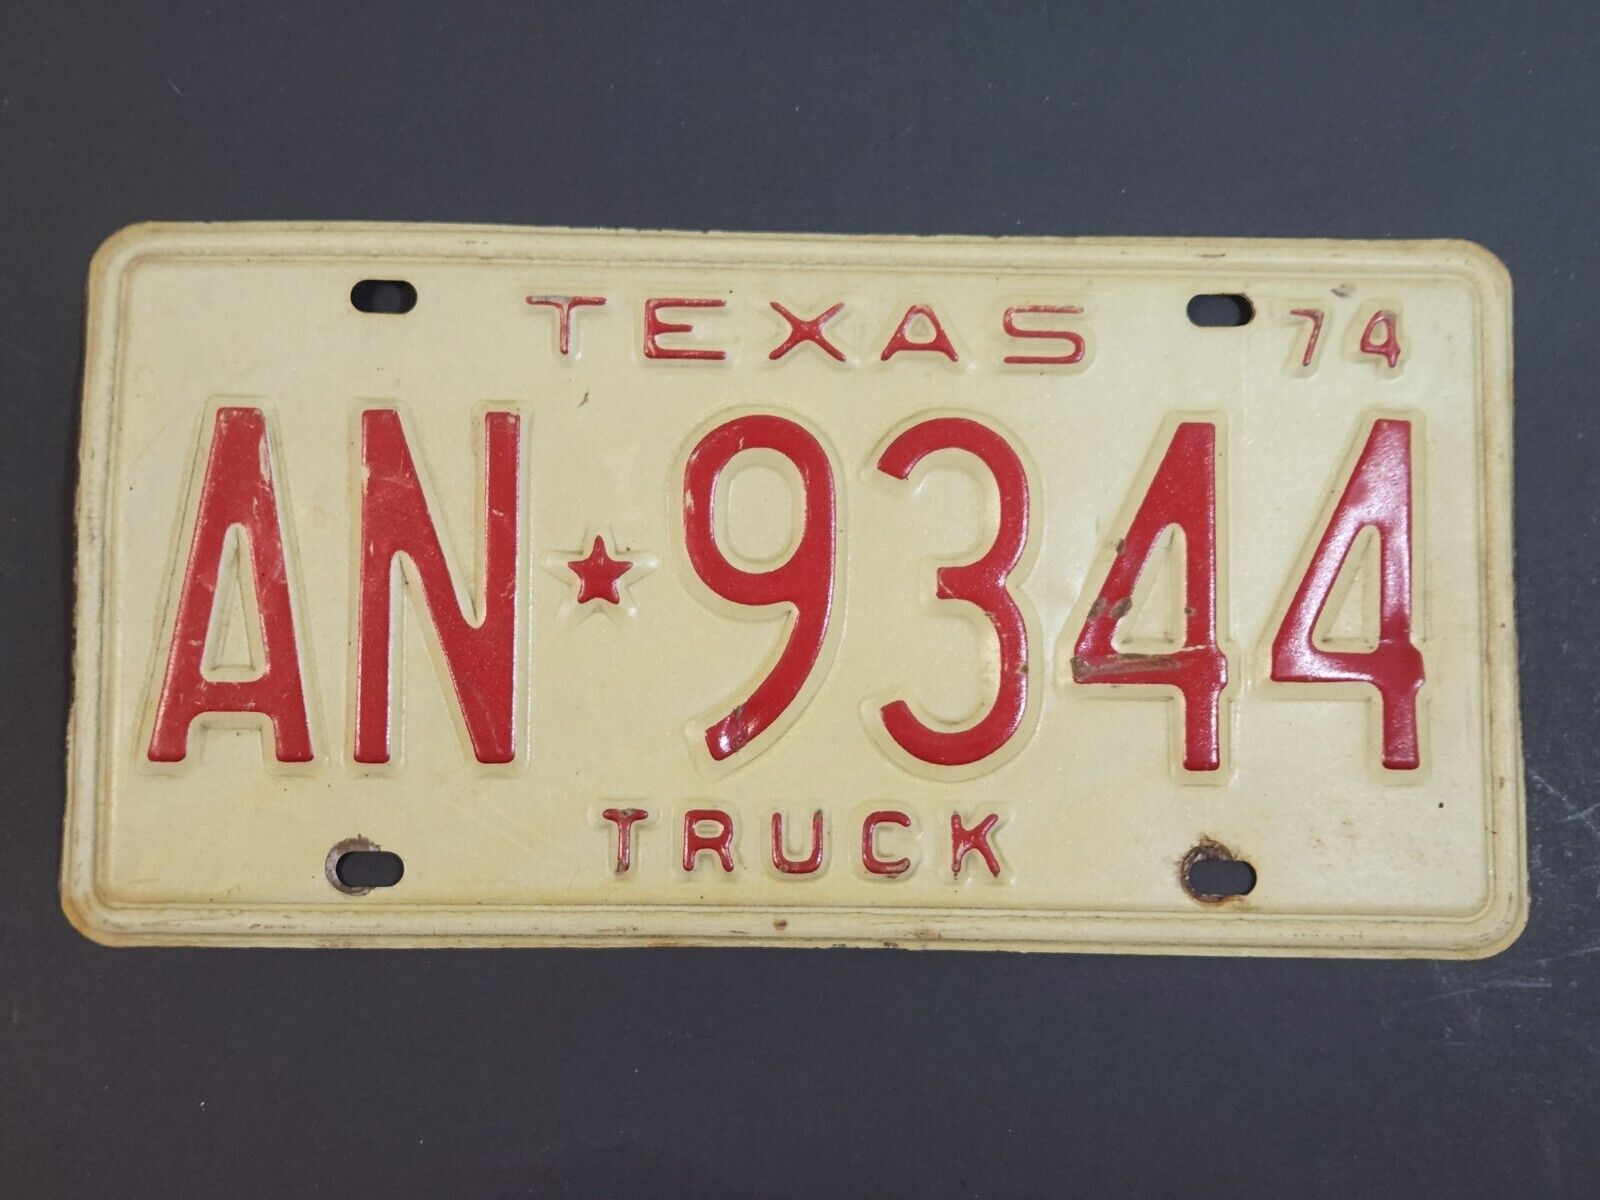 Vintage 1974 Texas Truck License Plate (AN-9344) Expired Red Letters